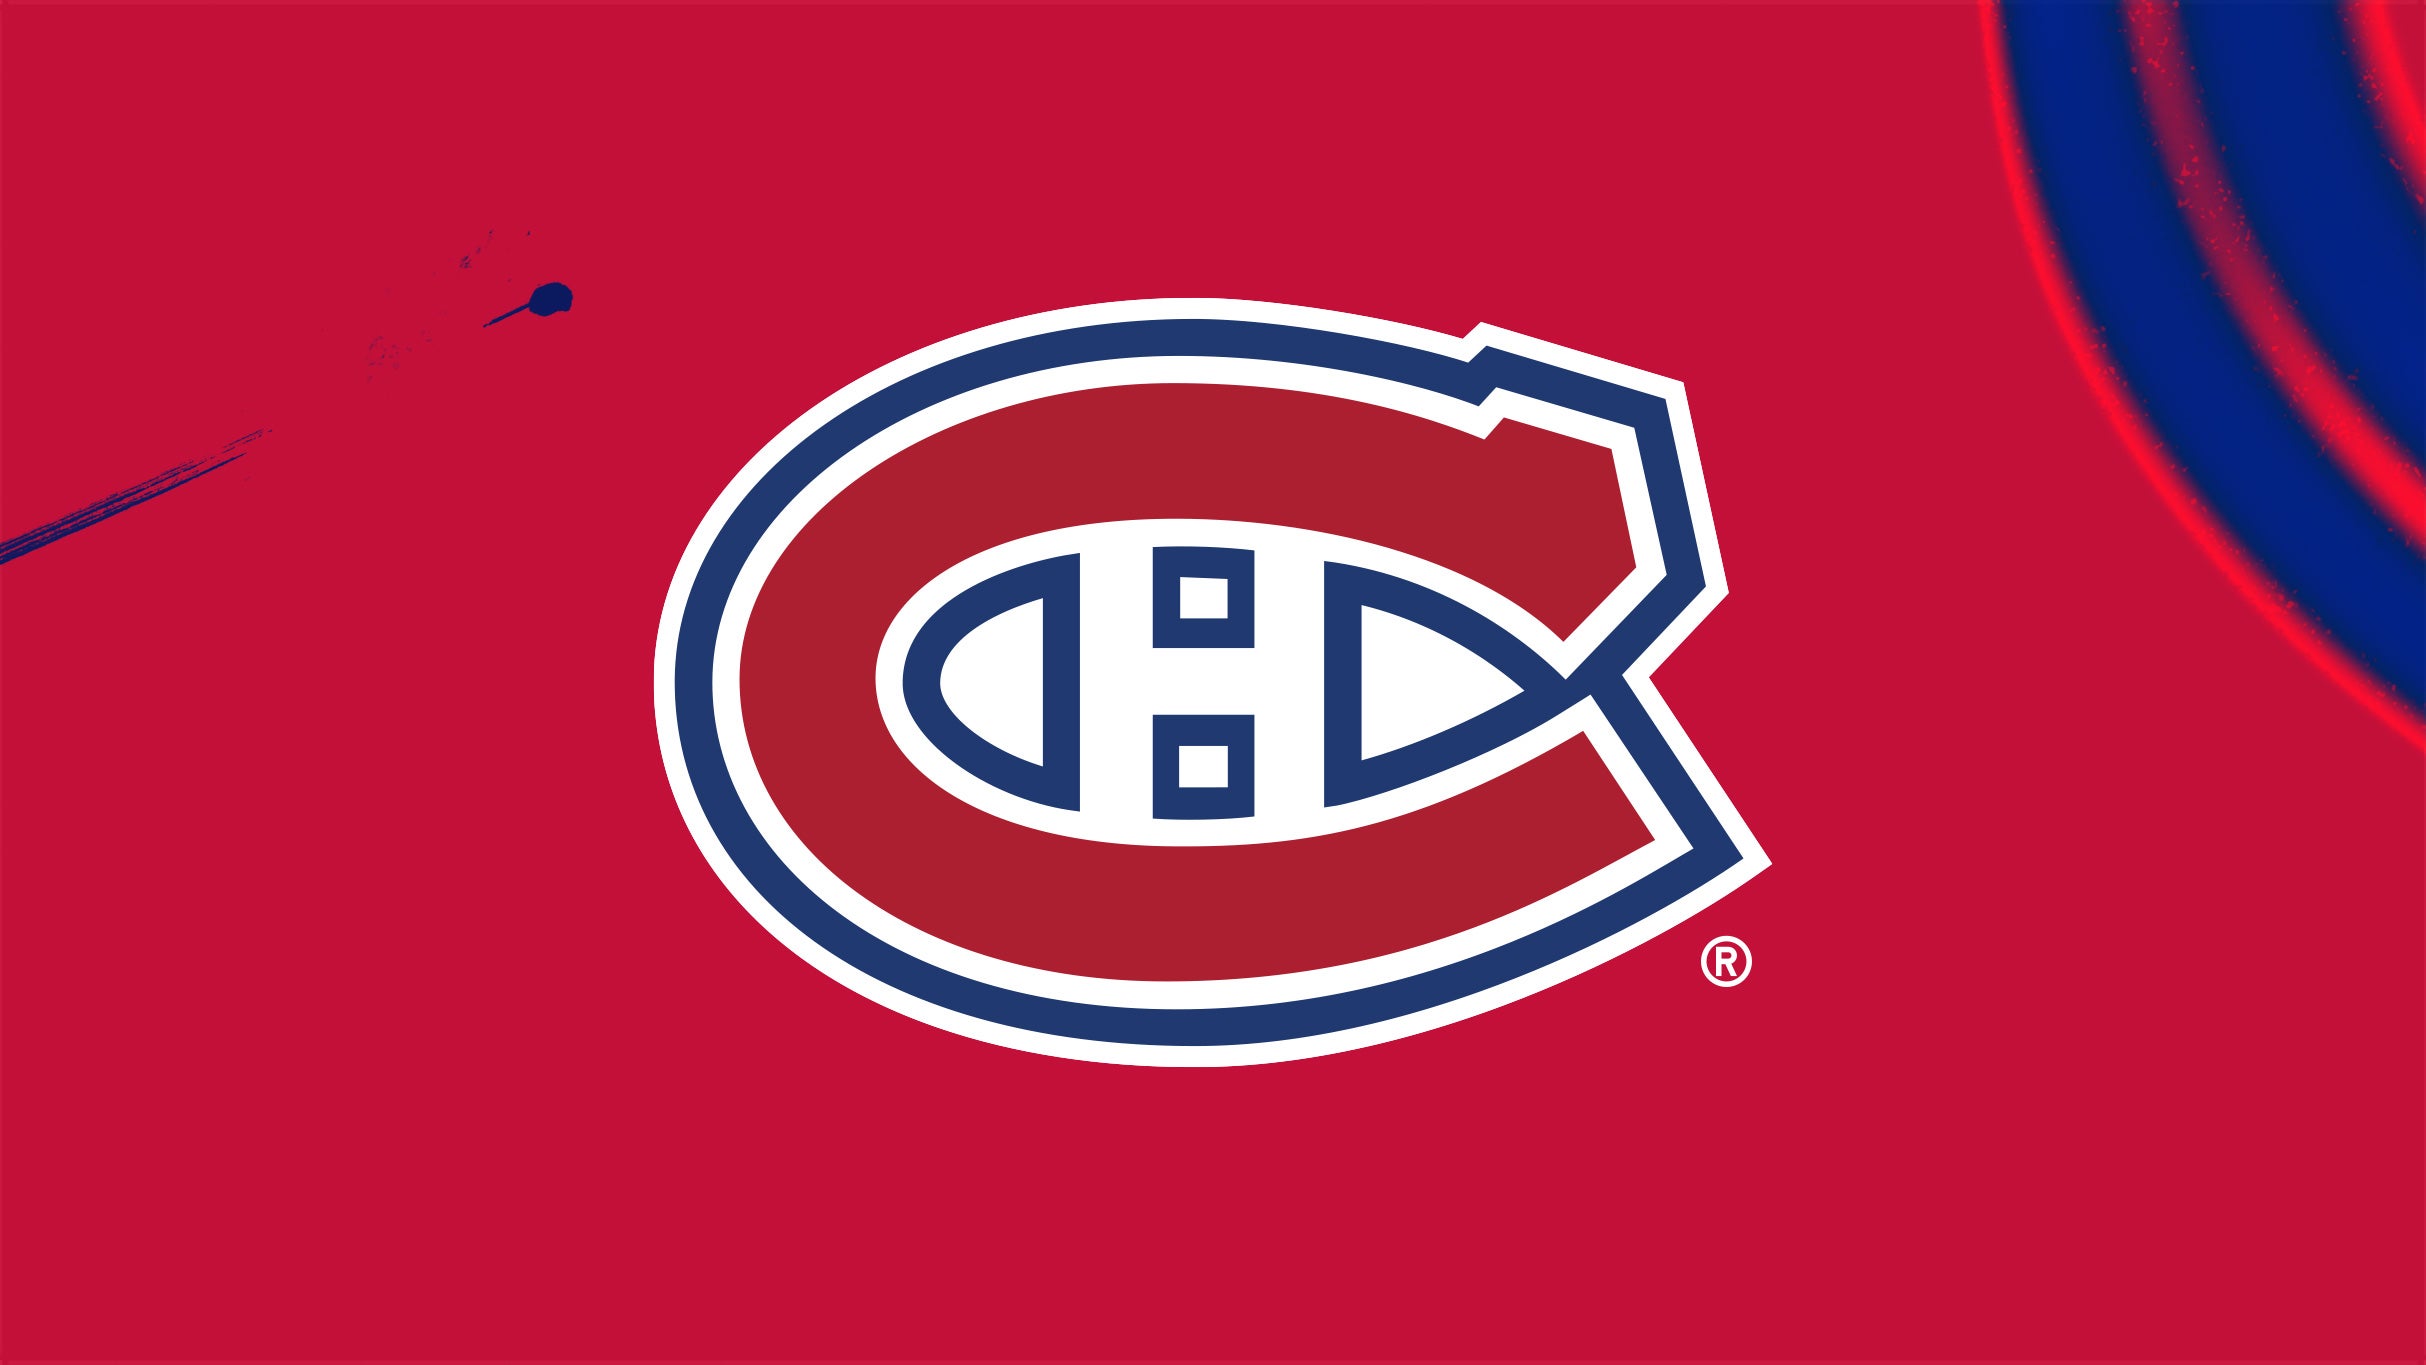 Montreal Canadiens vs. Boston Bruins in Montreal promo photo for Offre Or / Gold  presale offer code